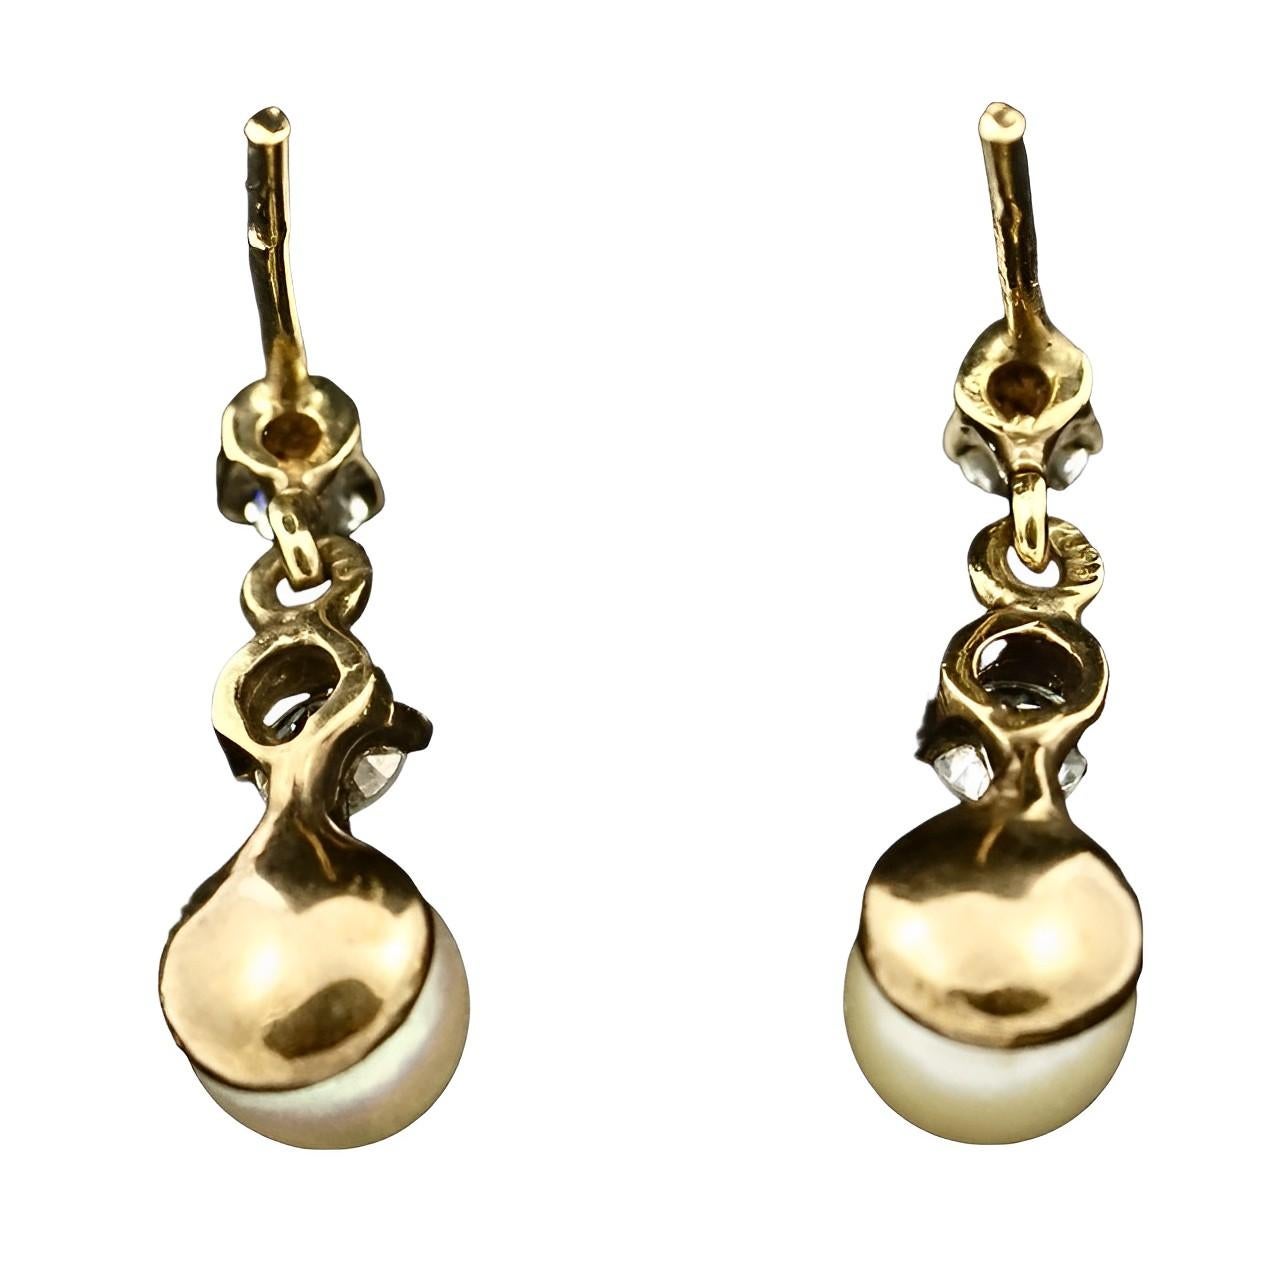 Lovely 9K gold cream cultured pearl and rhinestone drop earrings. Measuring length 1.6 cm / .62 inch, and the pearls are 5.5 mm. The earrings have new 9K gold butterfly backs.

This is a classic pair of pearl drop earrings.